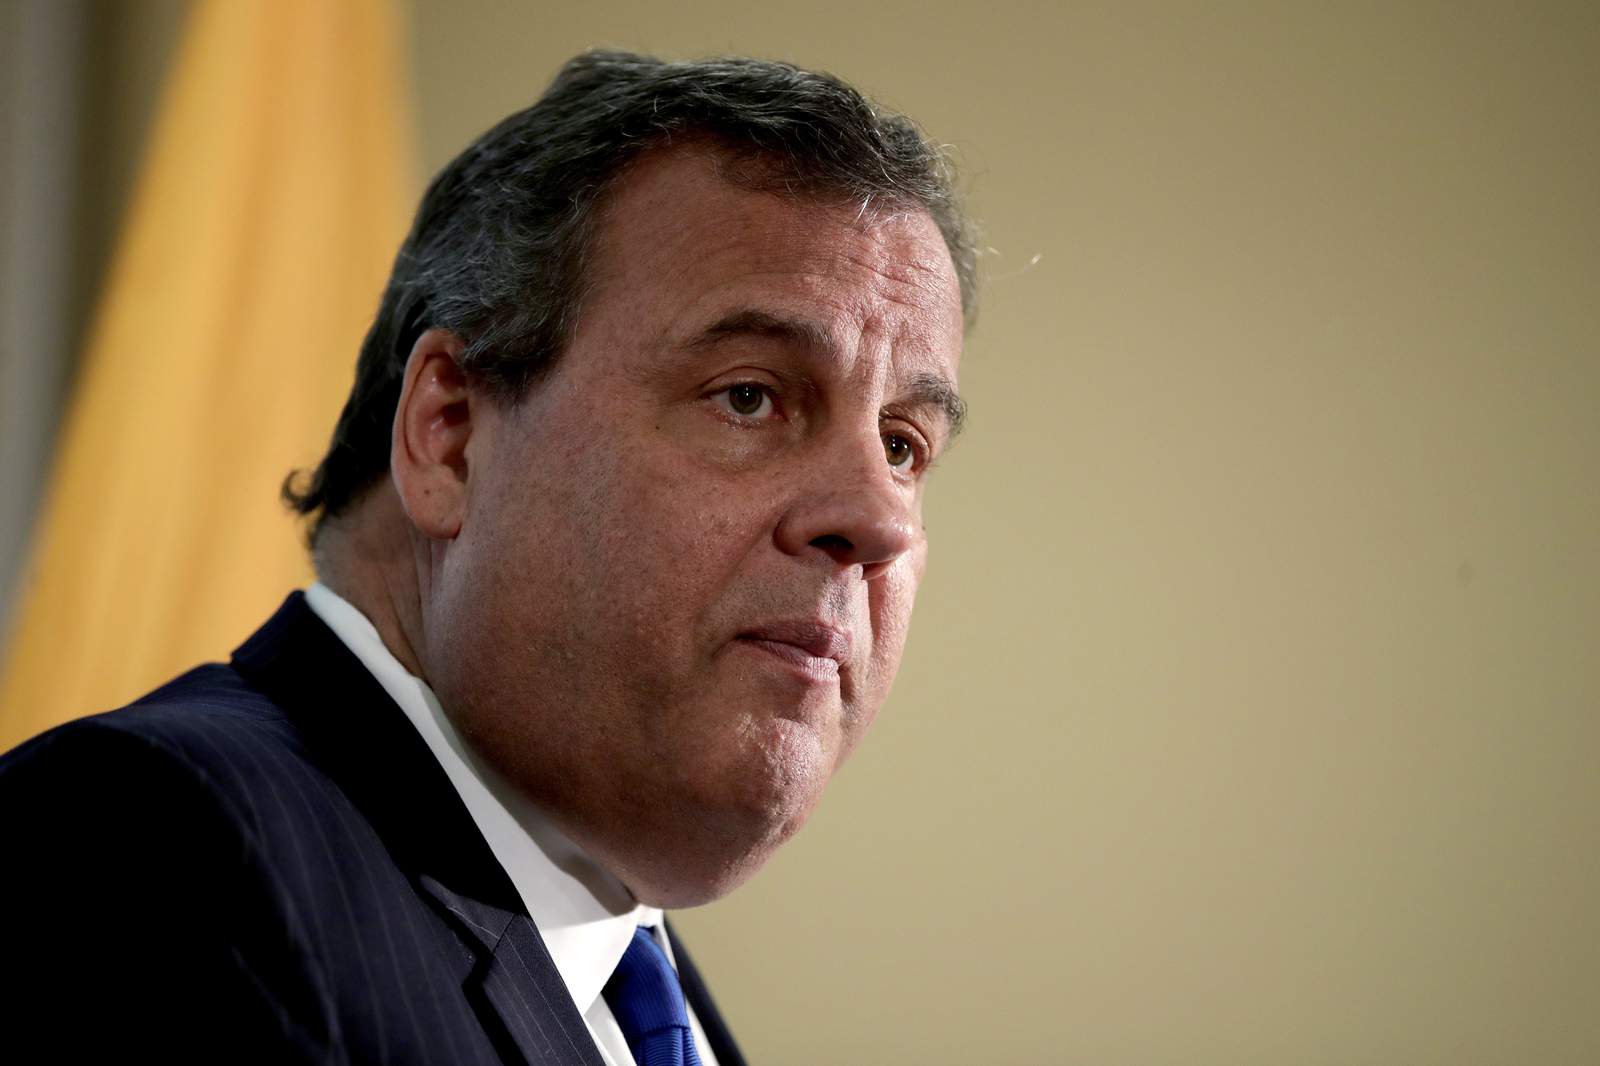 Ex-NJ governor Chris Christie says he's out of the hospital